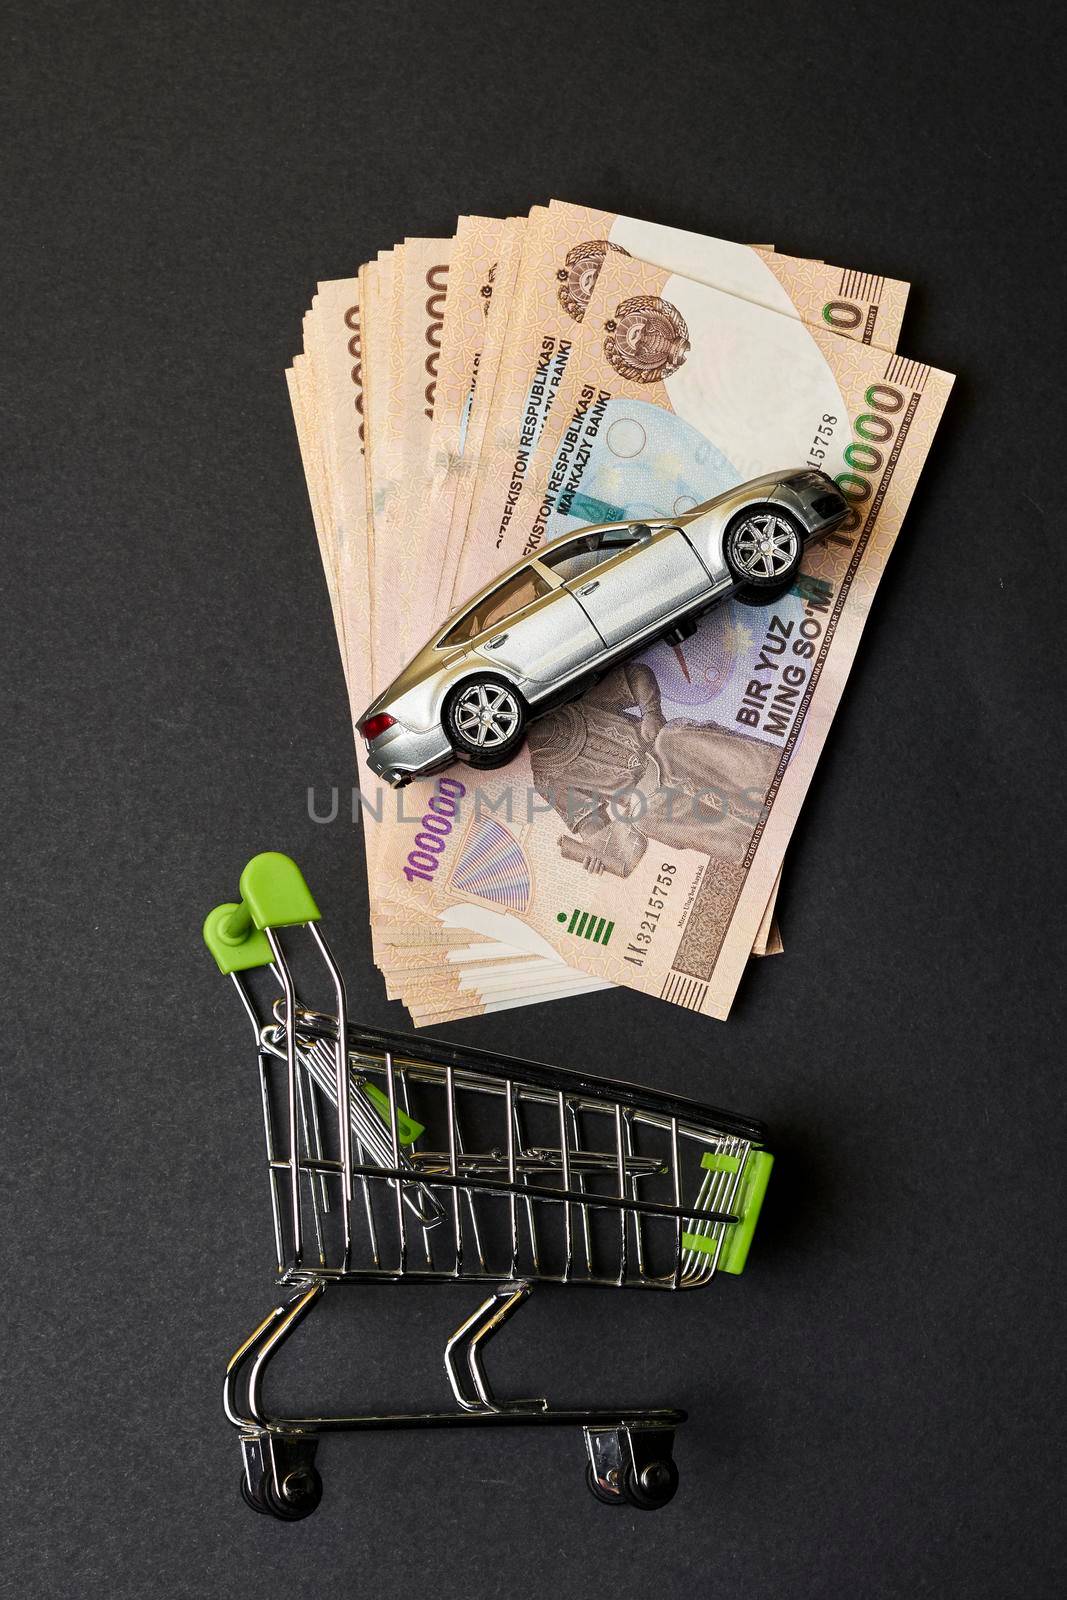 Buy auto insurance in Uzbekistan. Shopping cart, Uzbek sums and car toy. Concept of auto vehicle insuarance in Uzbekistan. Pile of 100000 sums and modern automobile toy